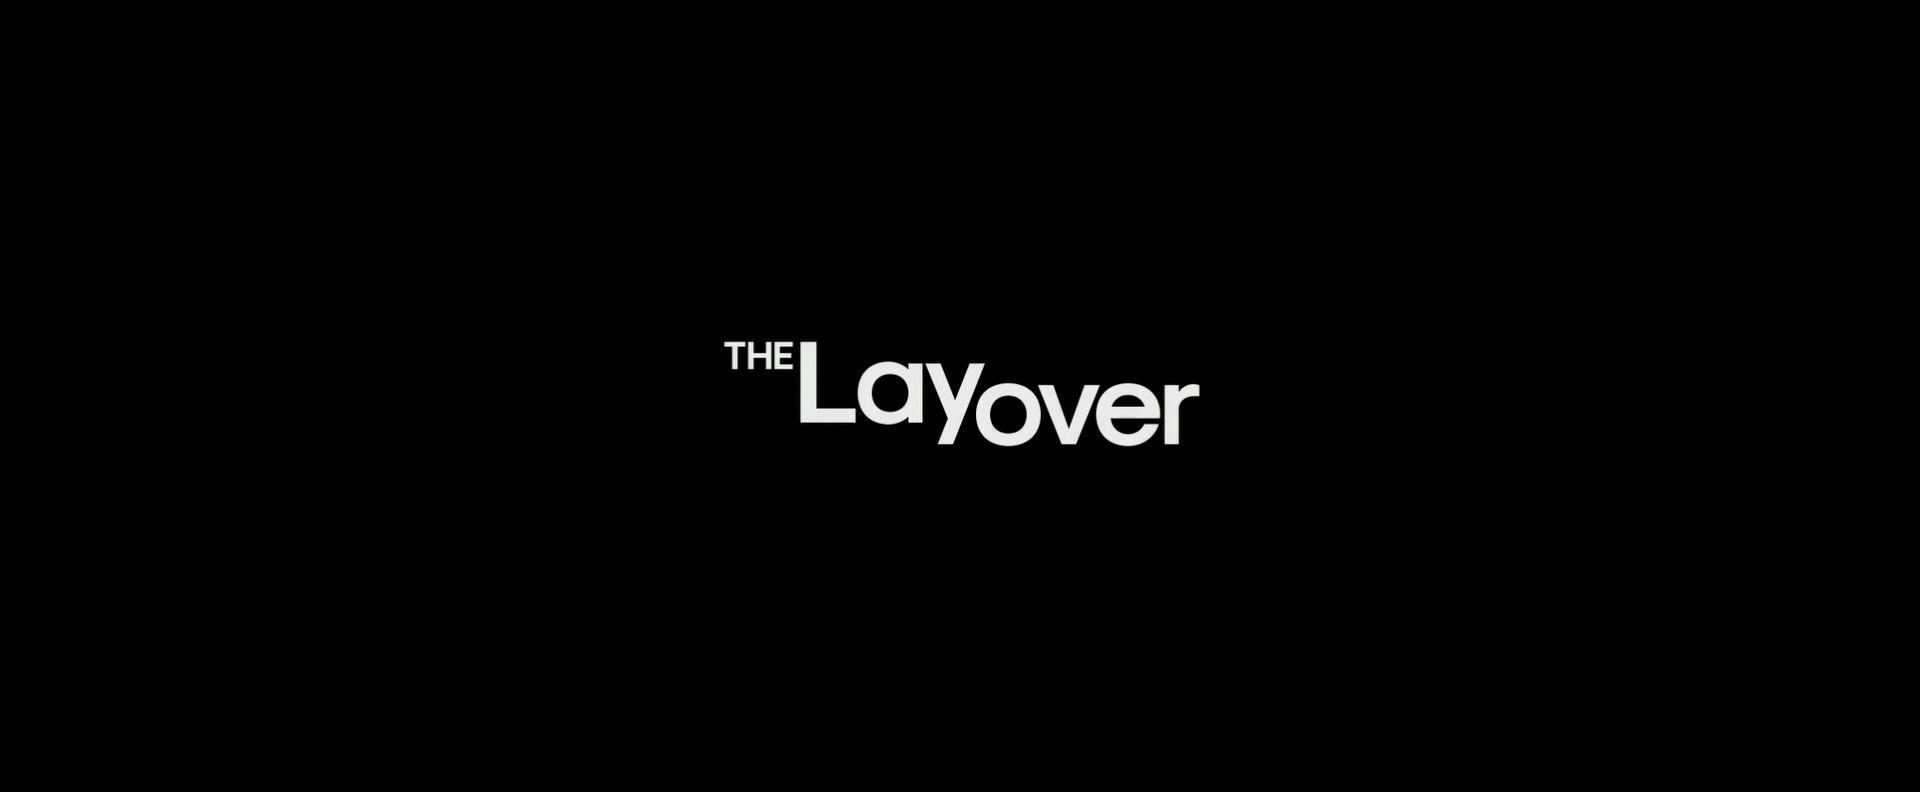 the layover (2017 film)